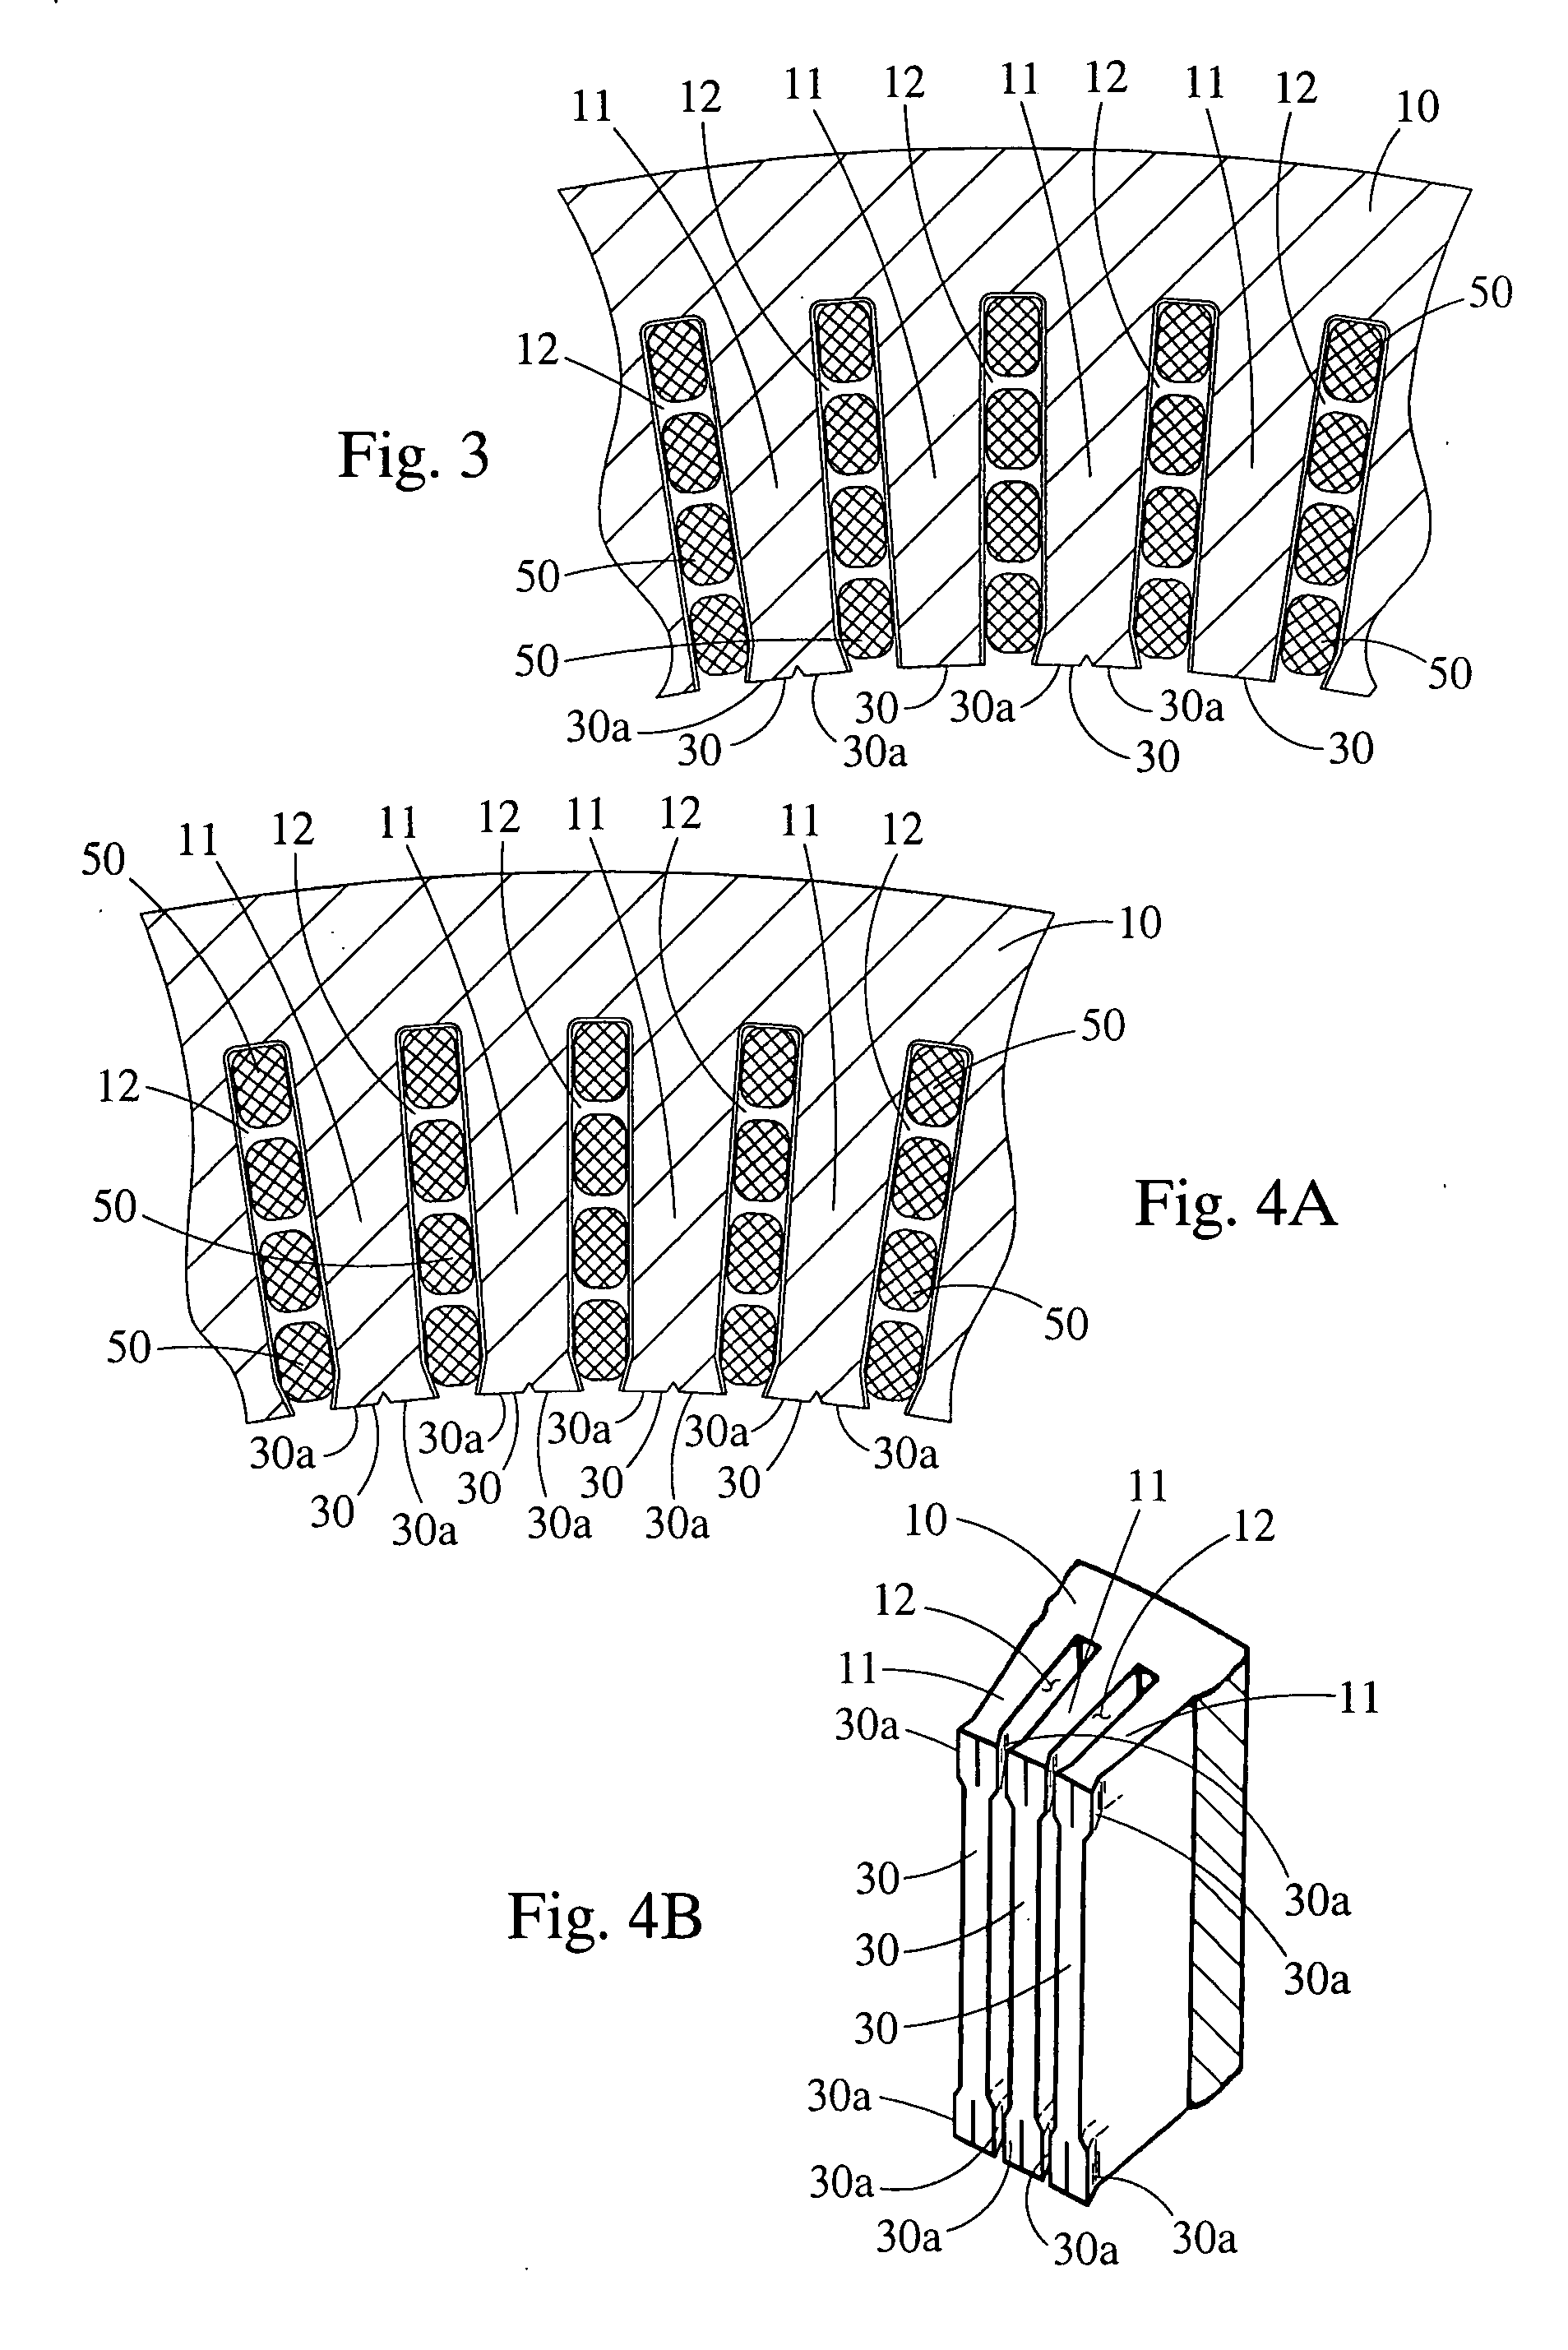 Stator of a rotary electric machine having staked core teeth